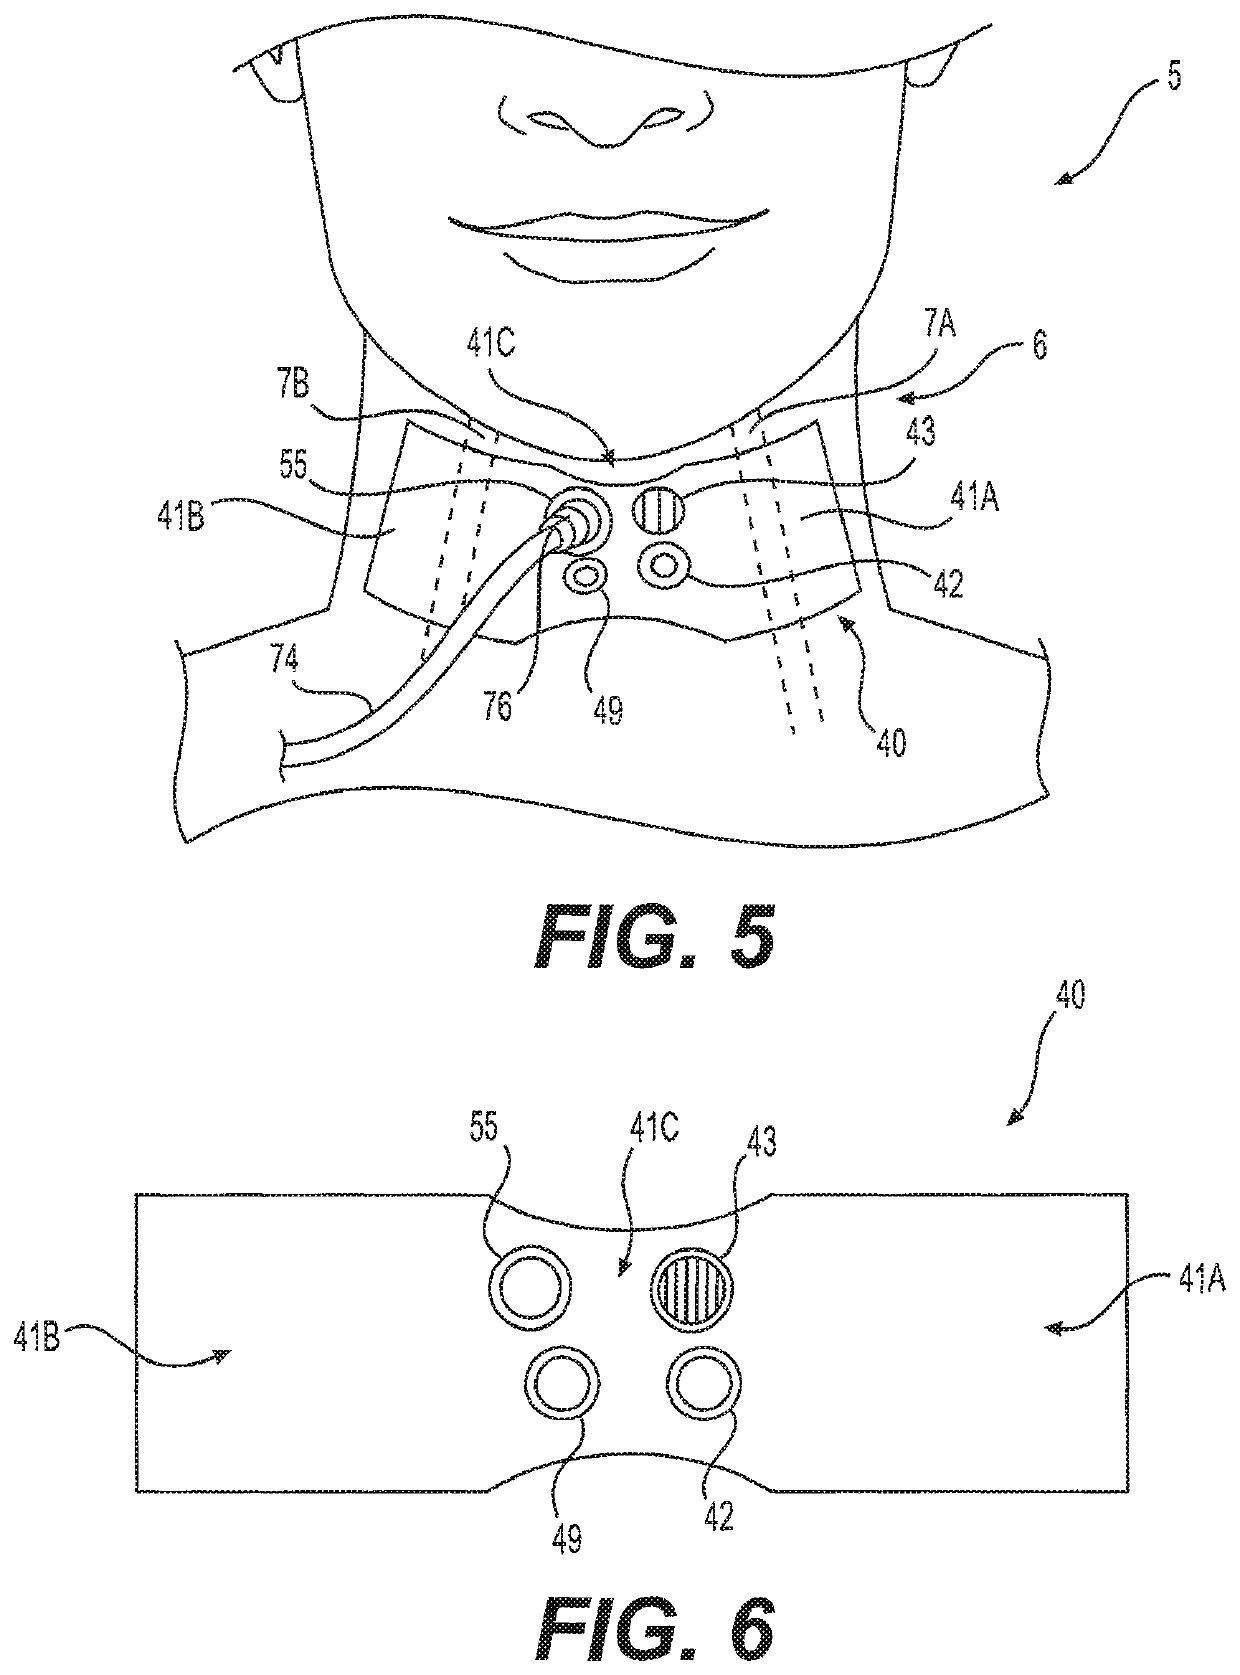 Stand-alone continuous cardiac doppler pulse monitoring patch with integral visual and auditory alerts, and patch-display system and method